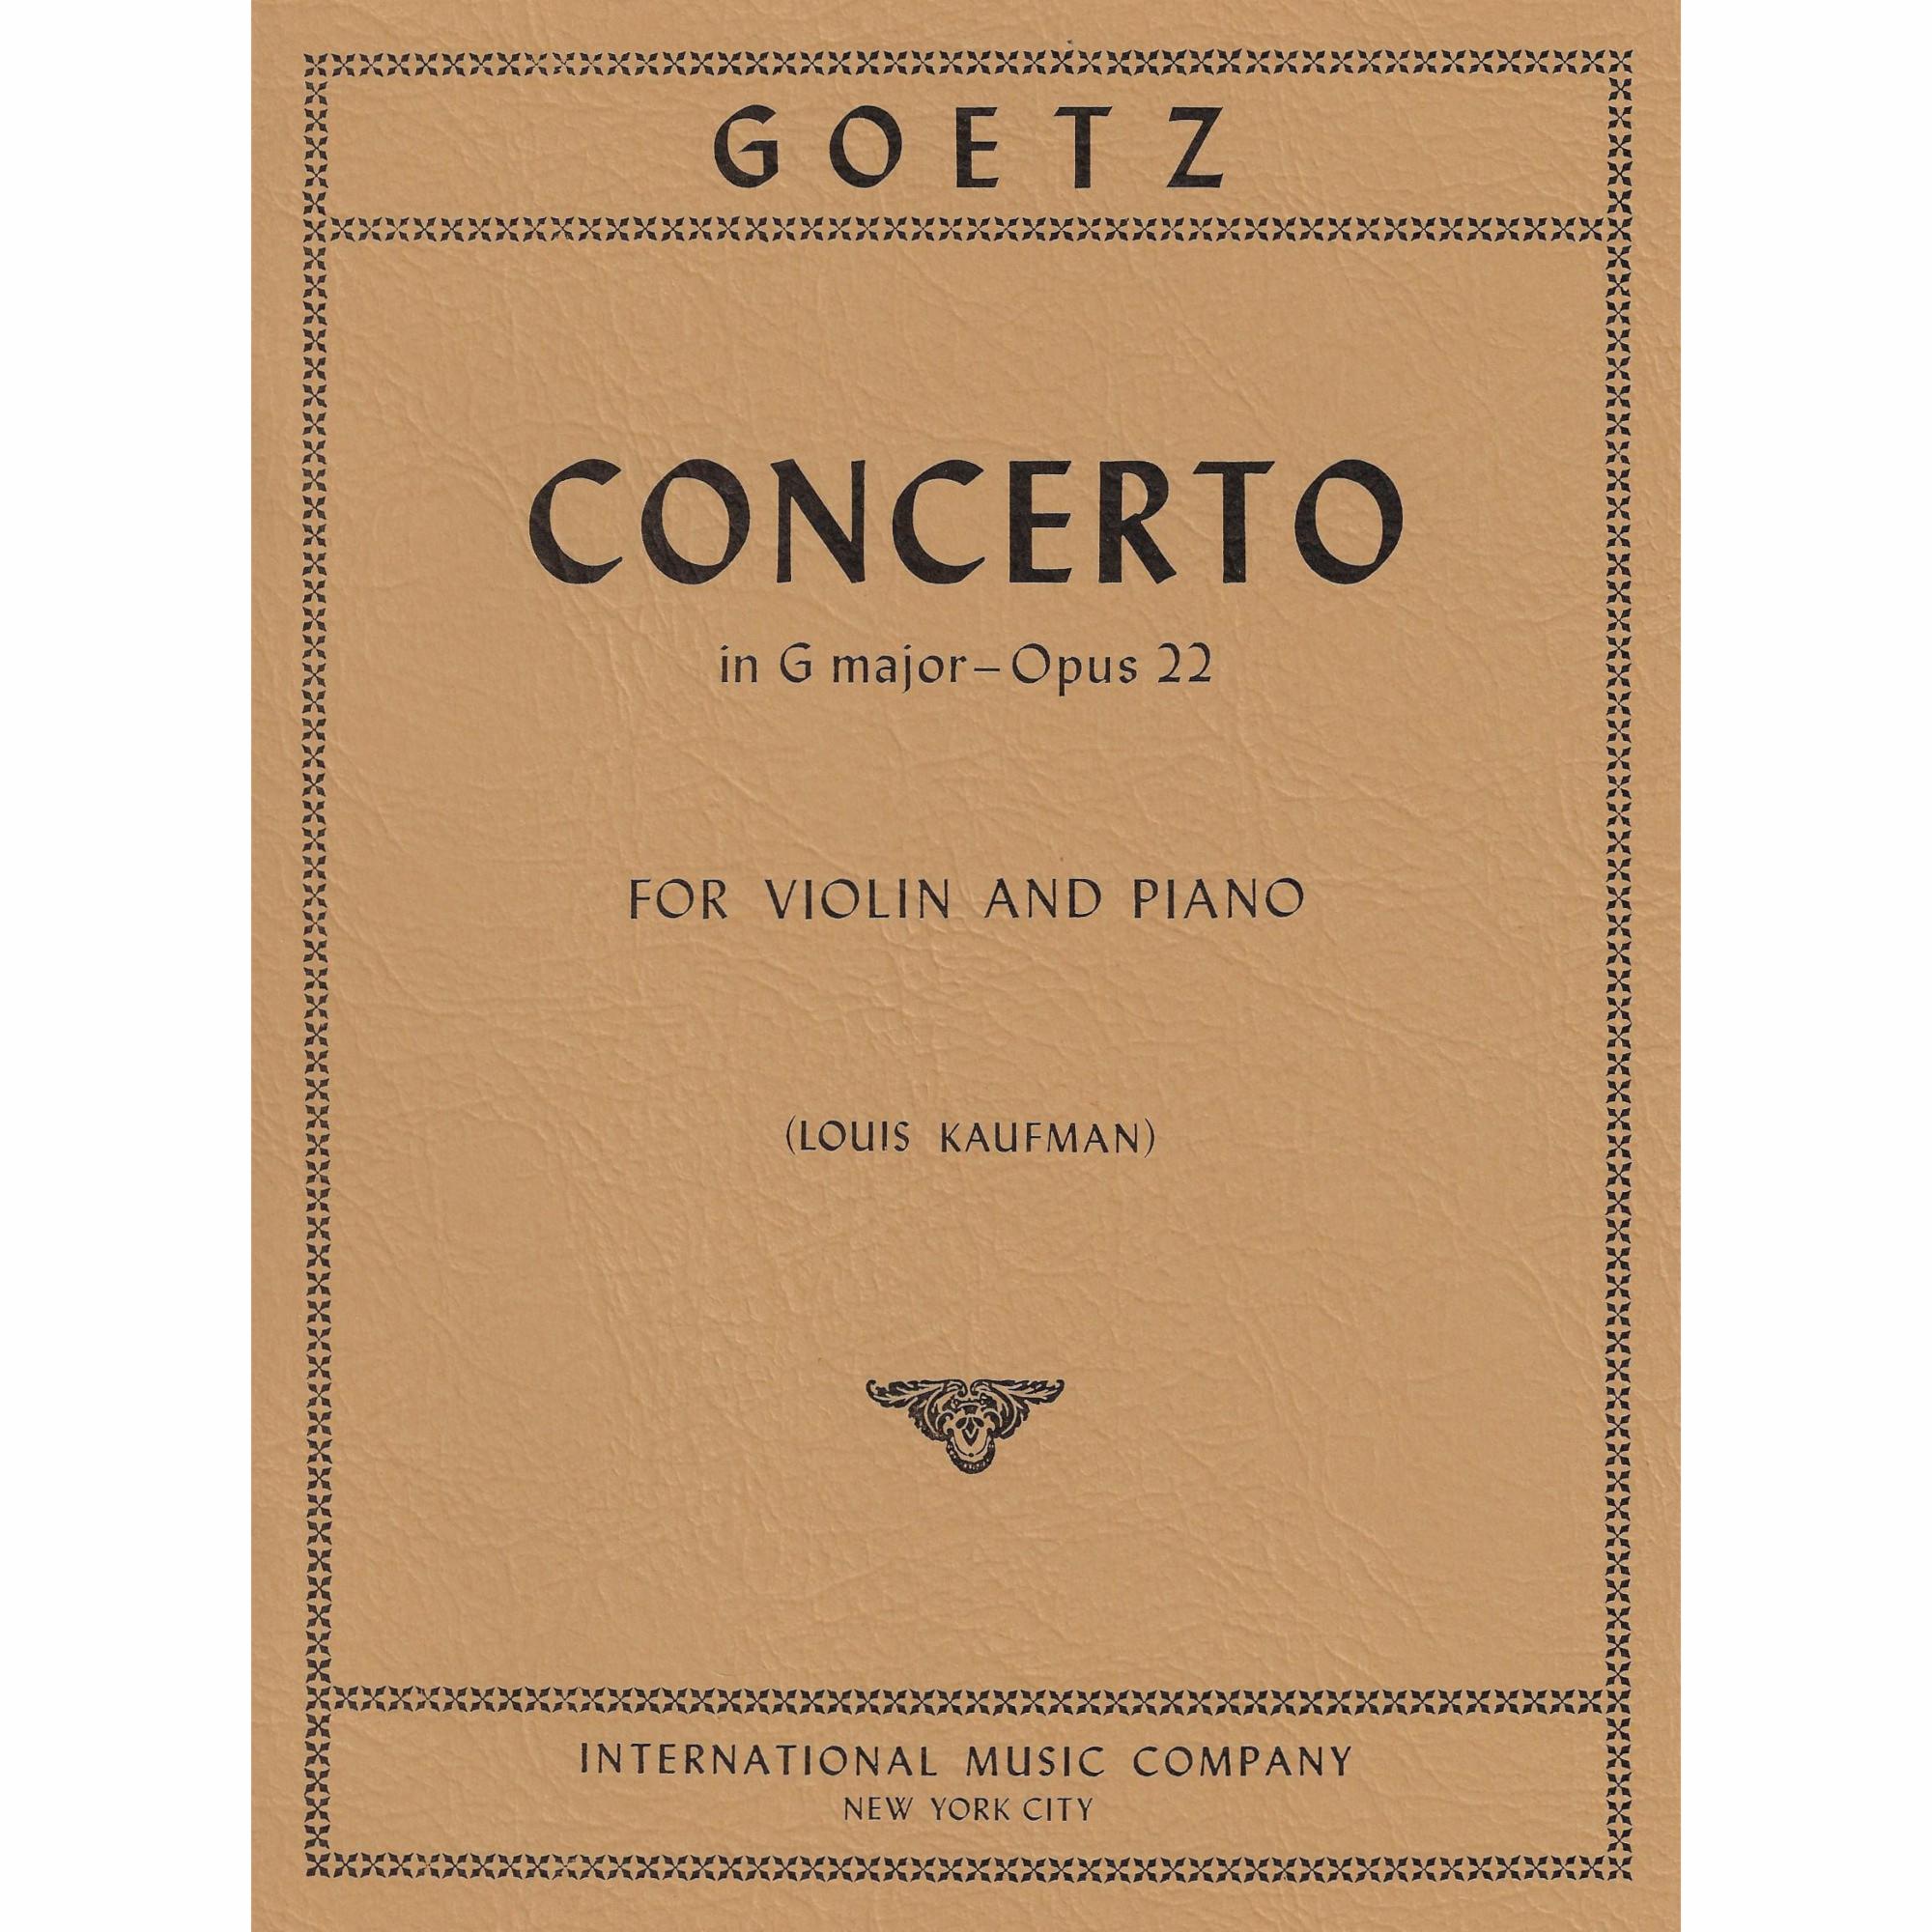 Goetz -- Concerto in G Major, Op. 22 for Violin and Piano